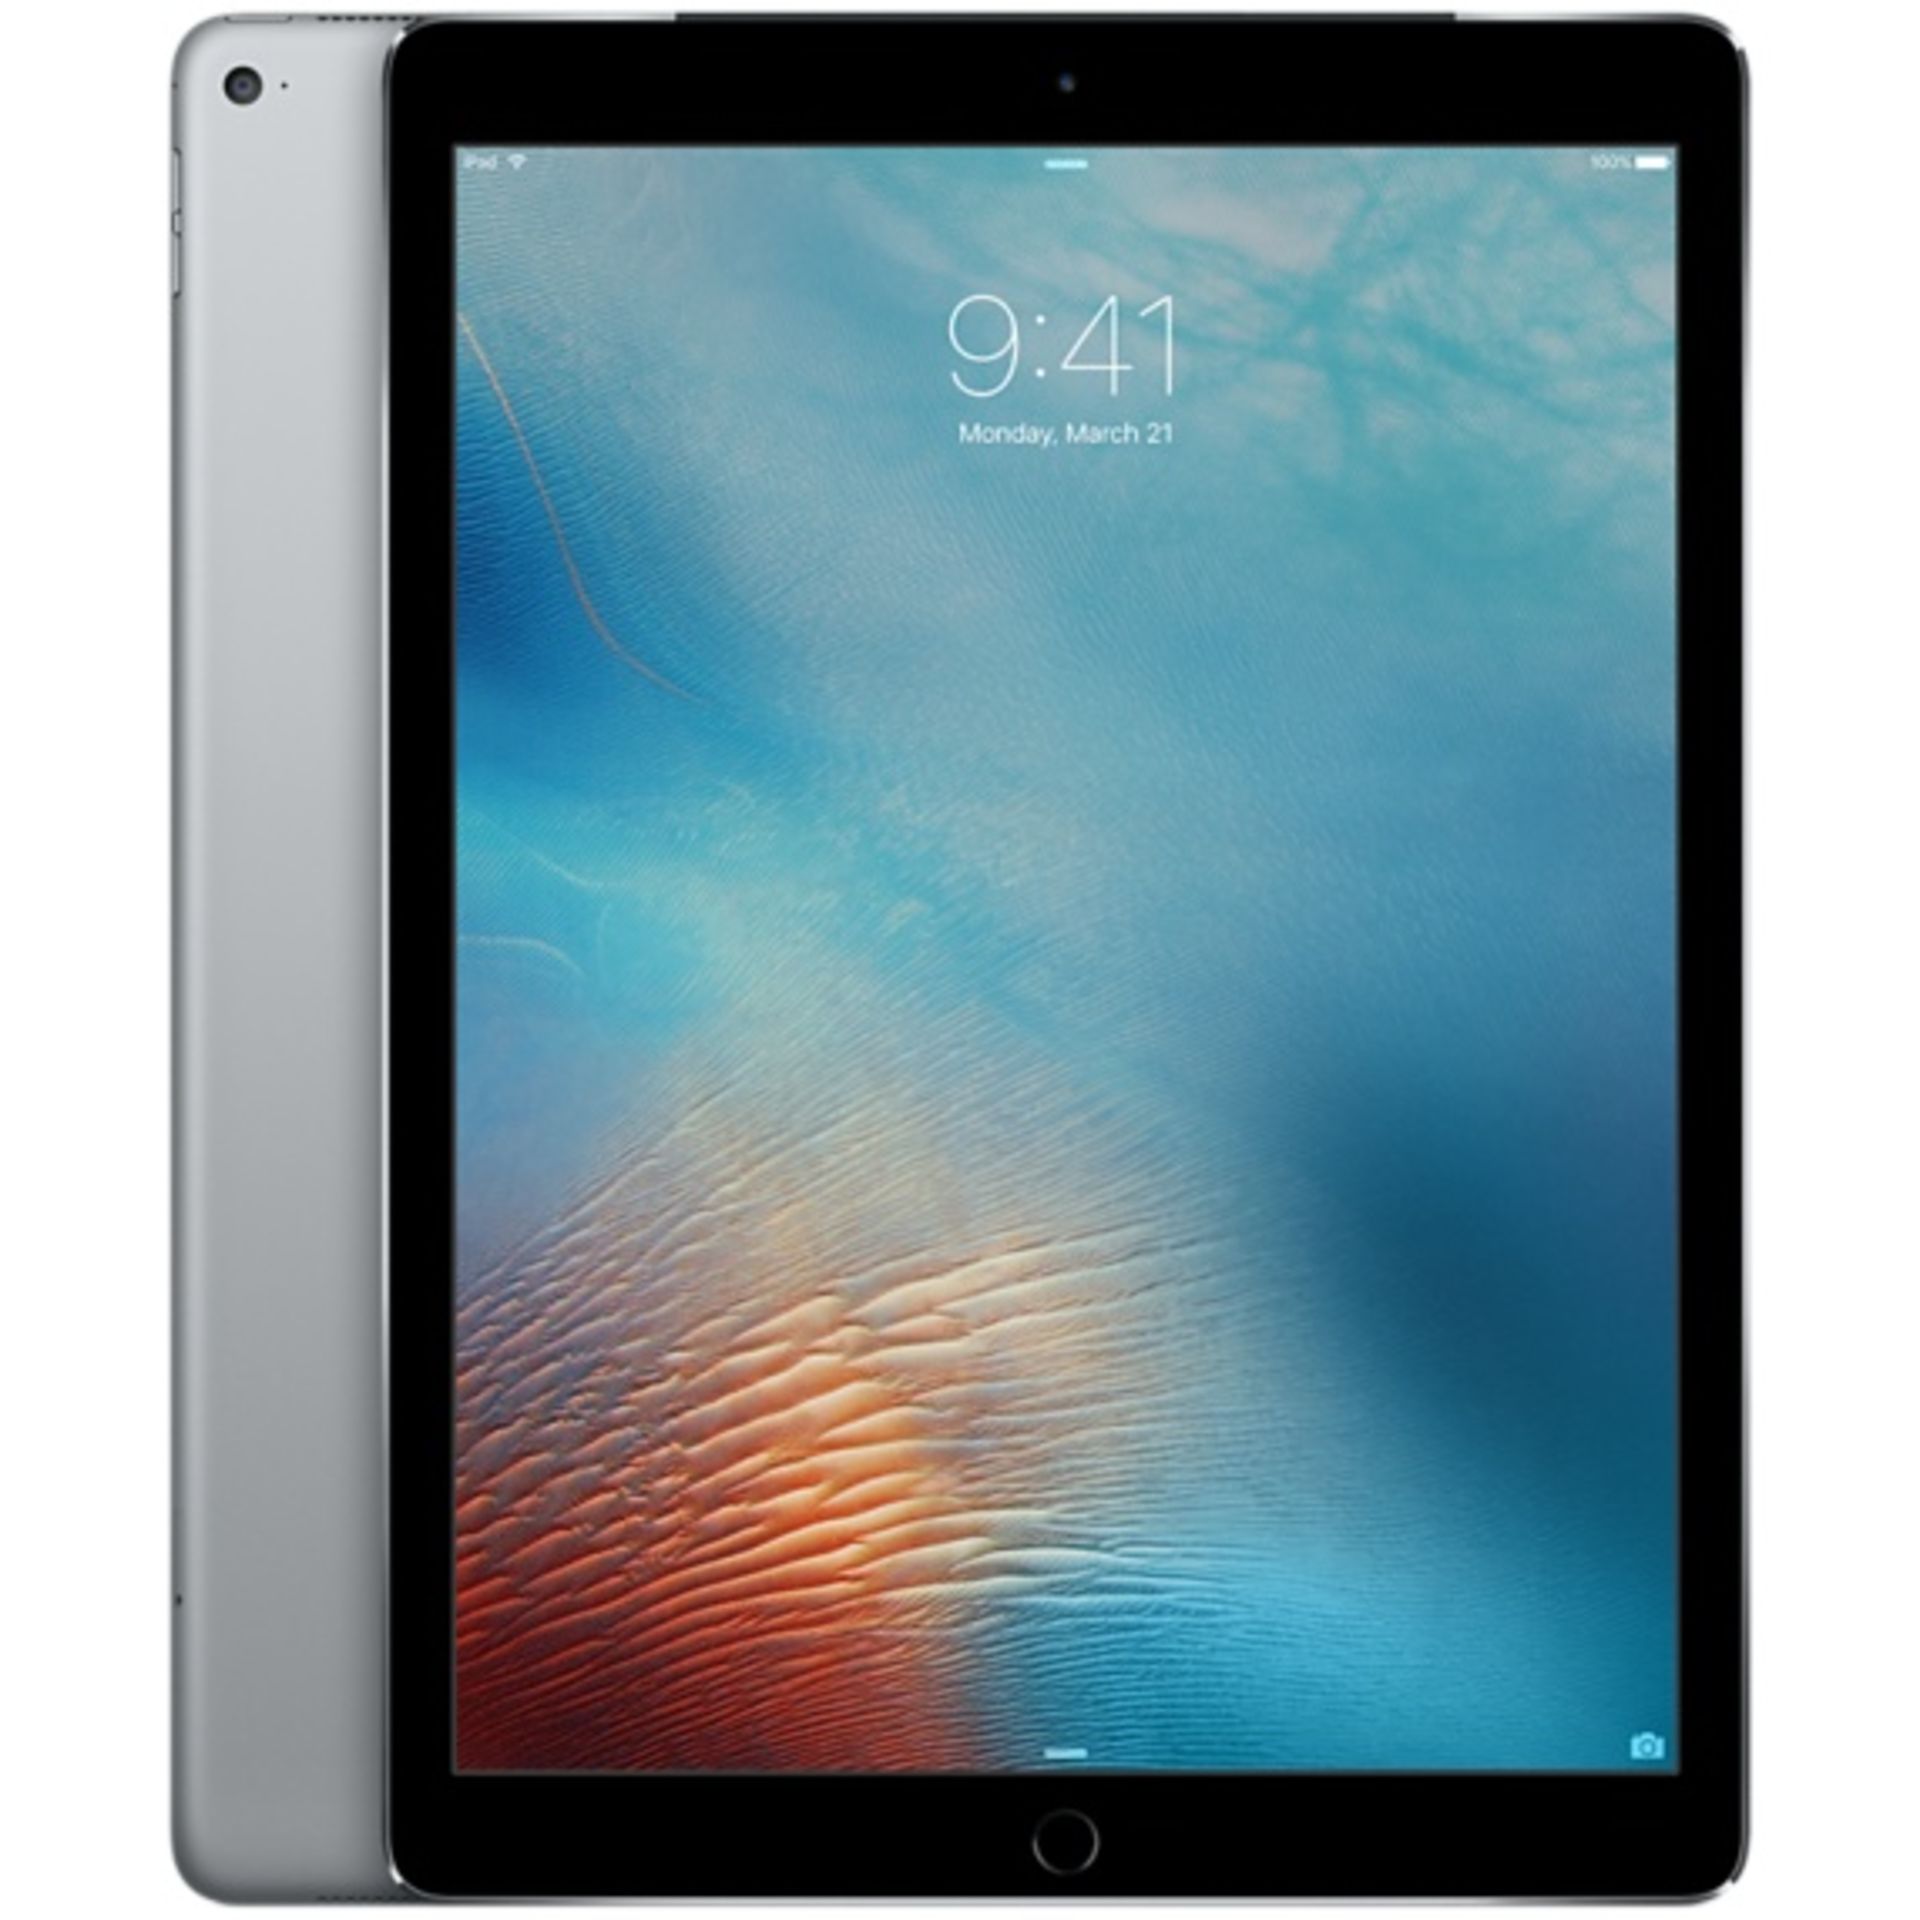 V Grade A Apple iPad Pro 12.9" Space Grey 32GB - Wi-Fi Only - with accessories and original box X